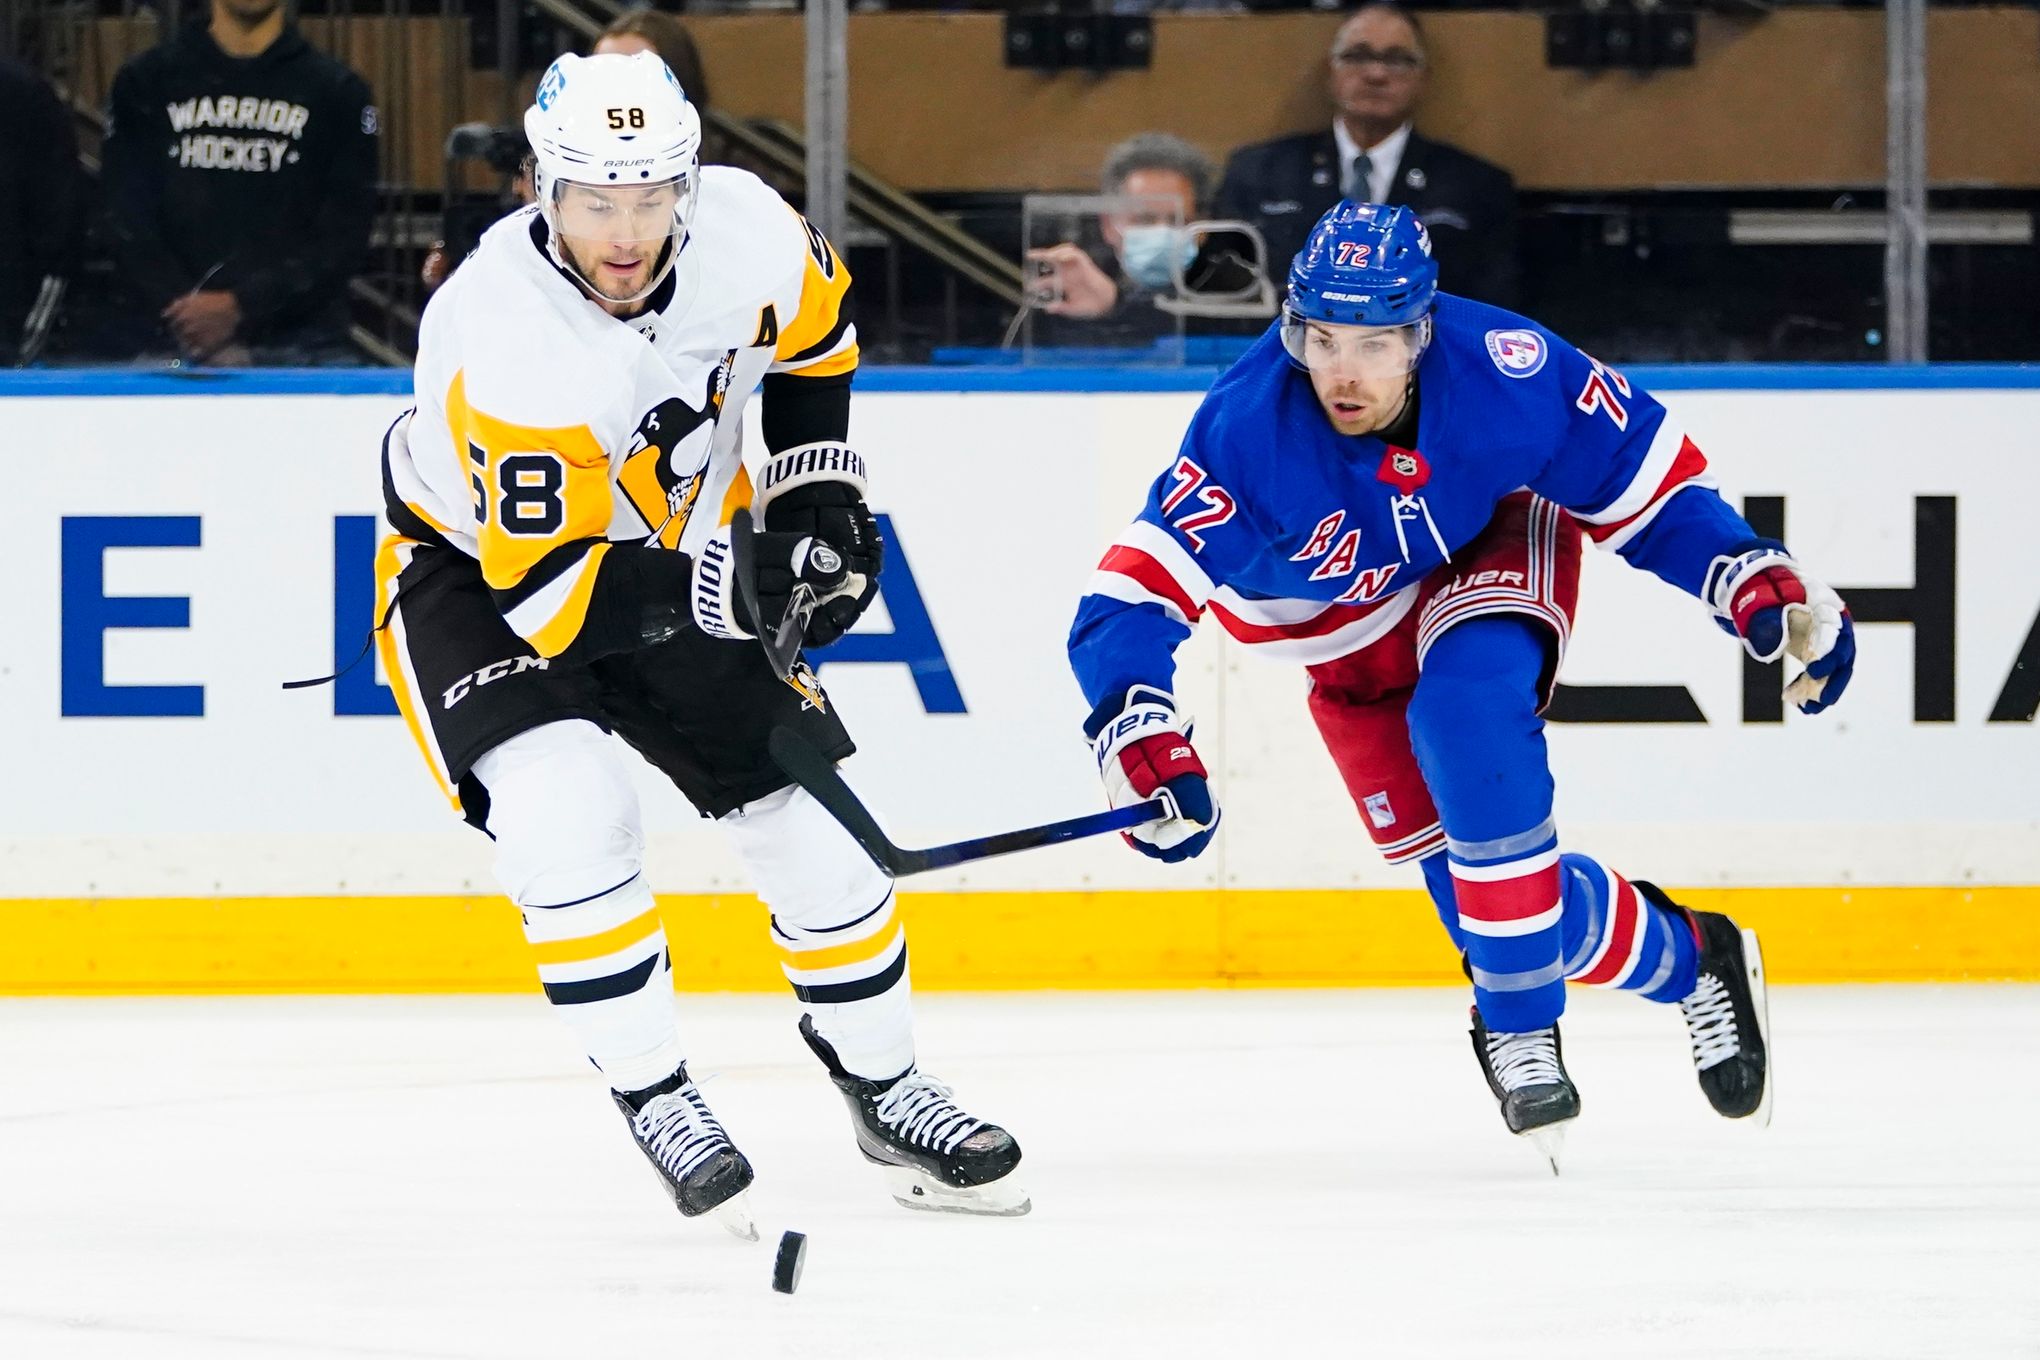 Contract term a sticking point in Penguins/Kris Letang negotiation